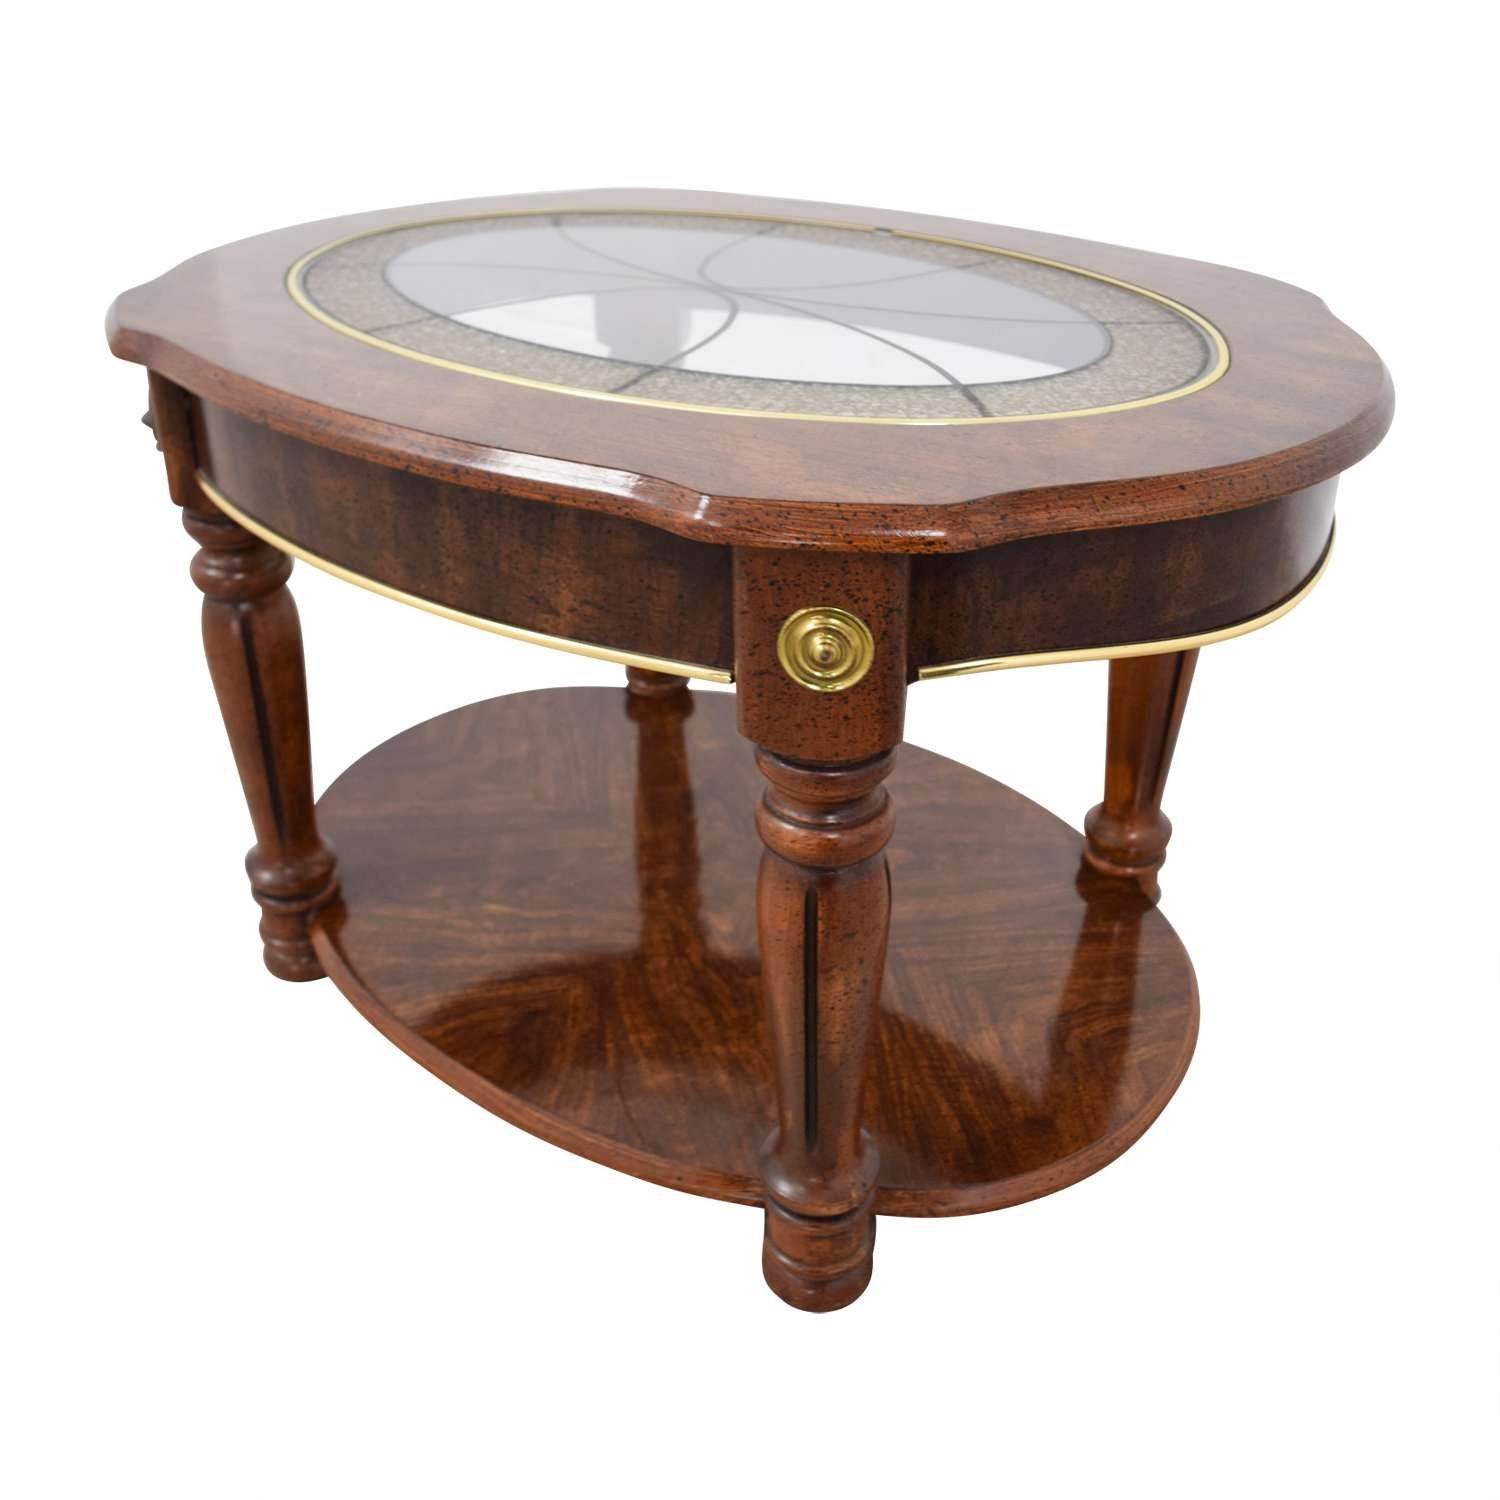 [%popular Small Circle Coffee Tables Intended For 65% Off – Vintage Small Round Coffee Table / Tables|65% Off – Vintage Small Round Coffee Table / Tables Within Most Current Small Circle Coffee Tables%] (View 9 of 20)